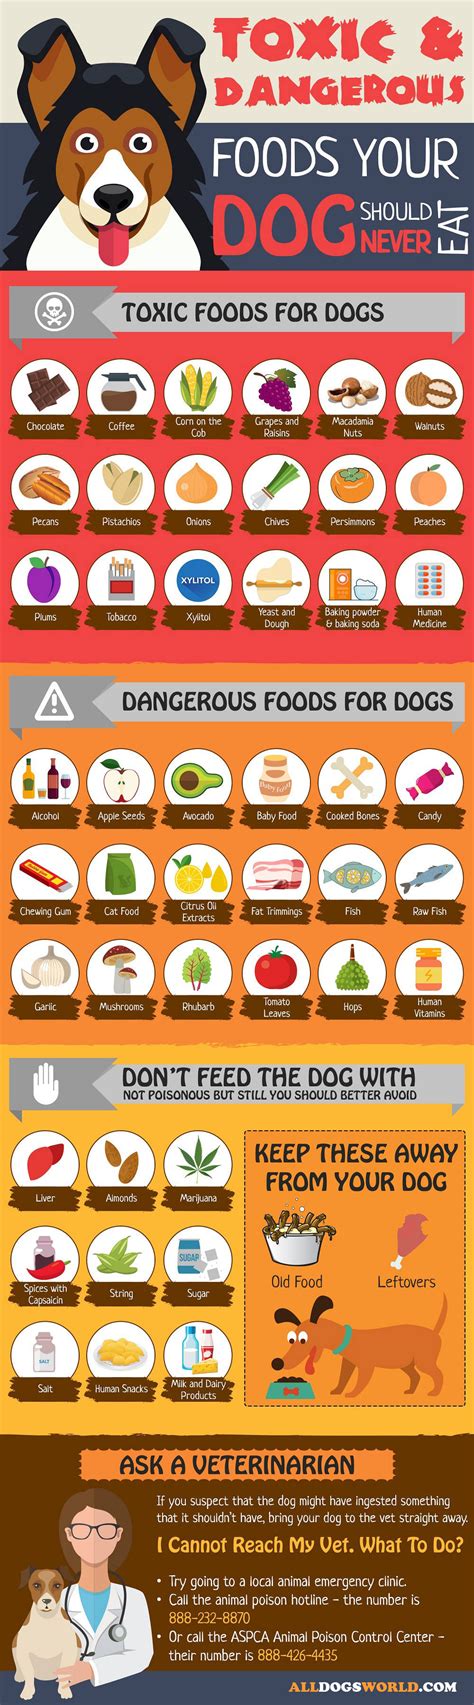 What meats are bad for dogs?